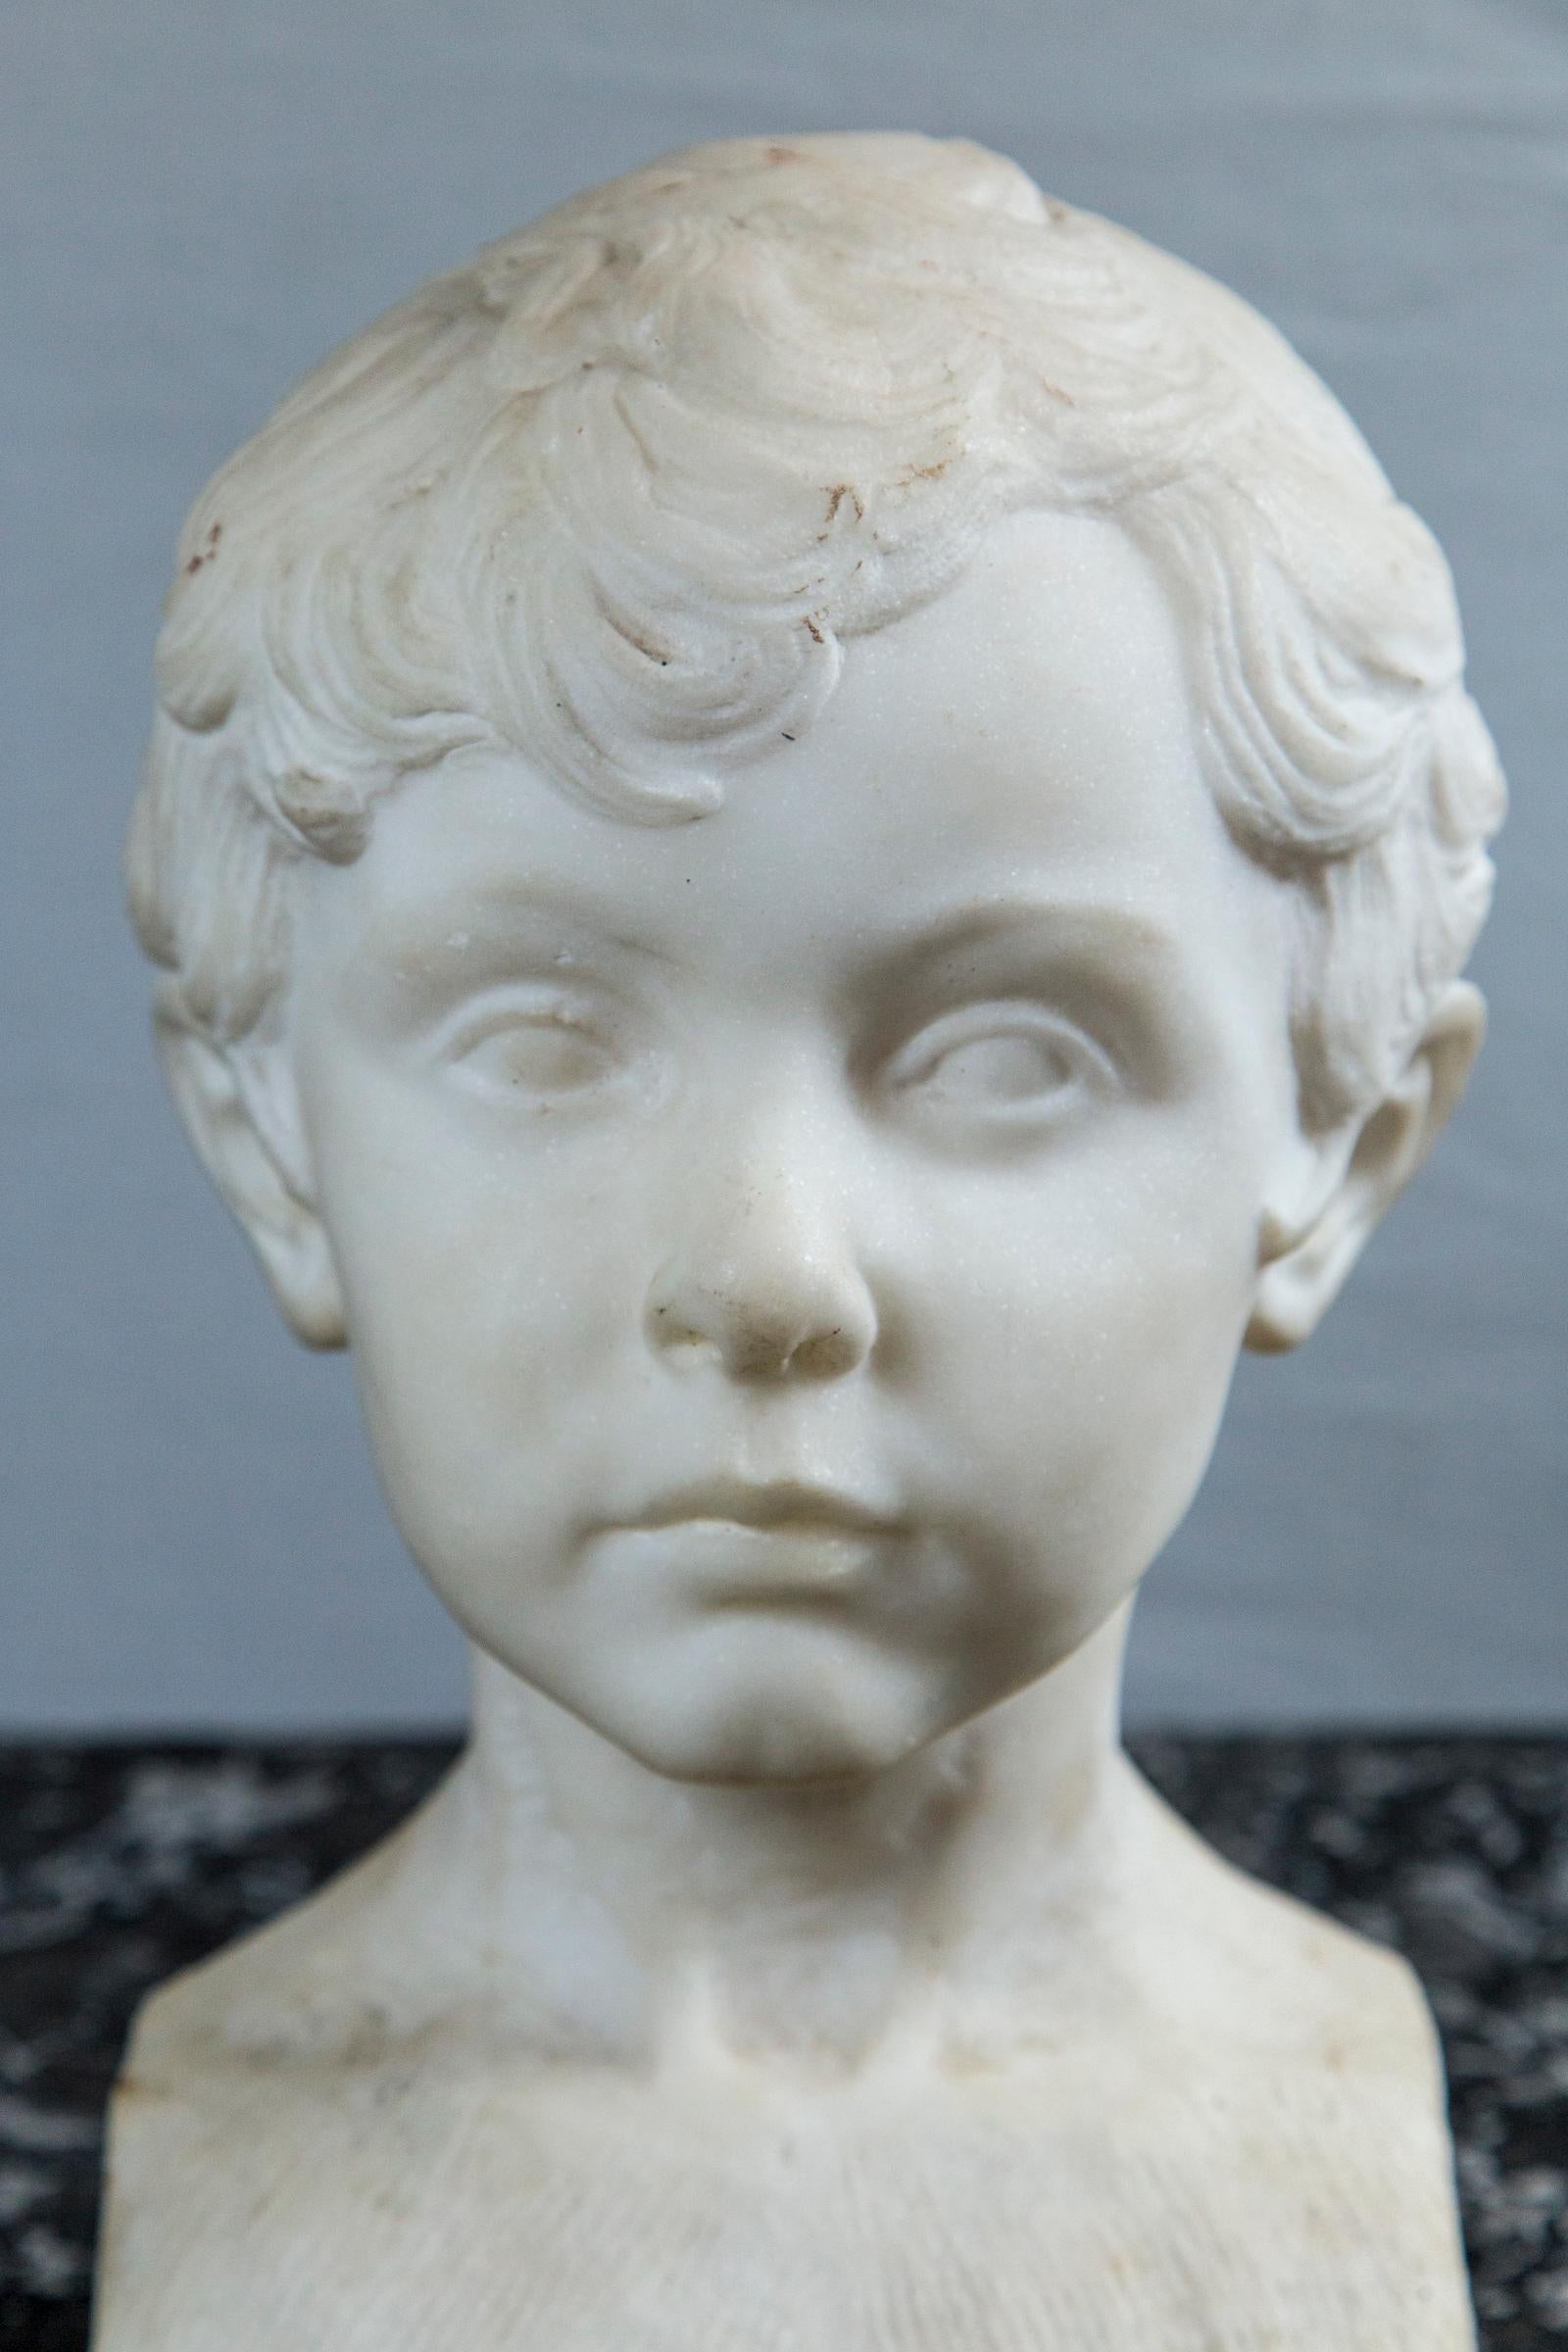 Hand-Carved White Marble Bust of a Young Boy